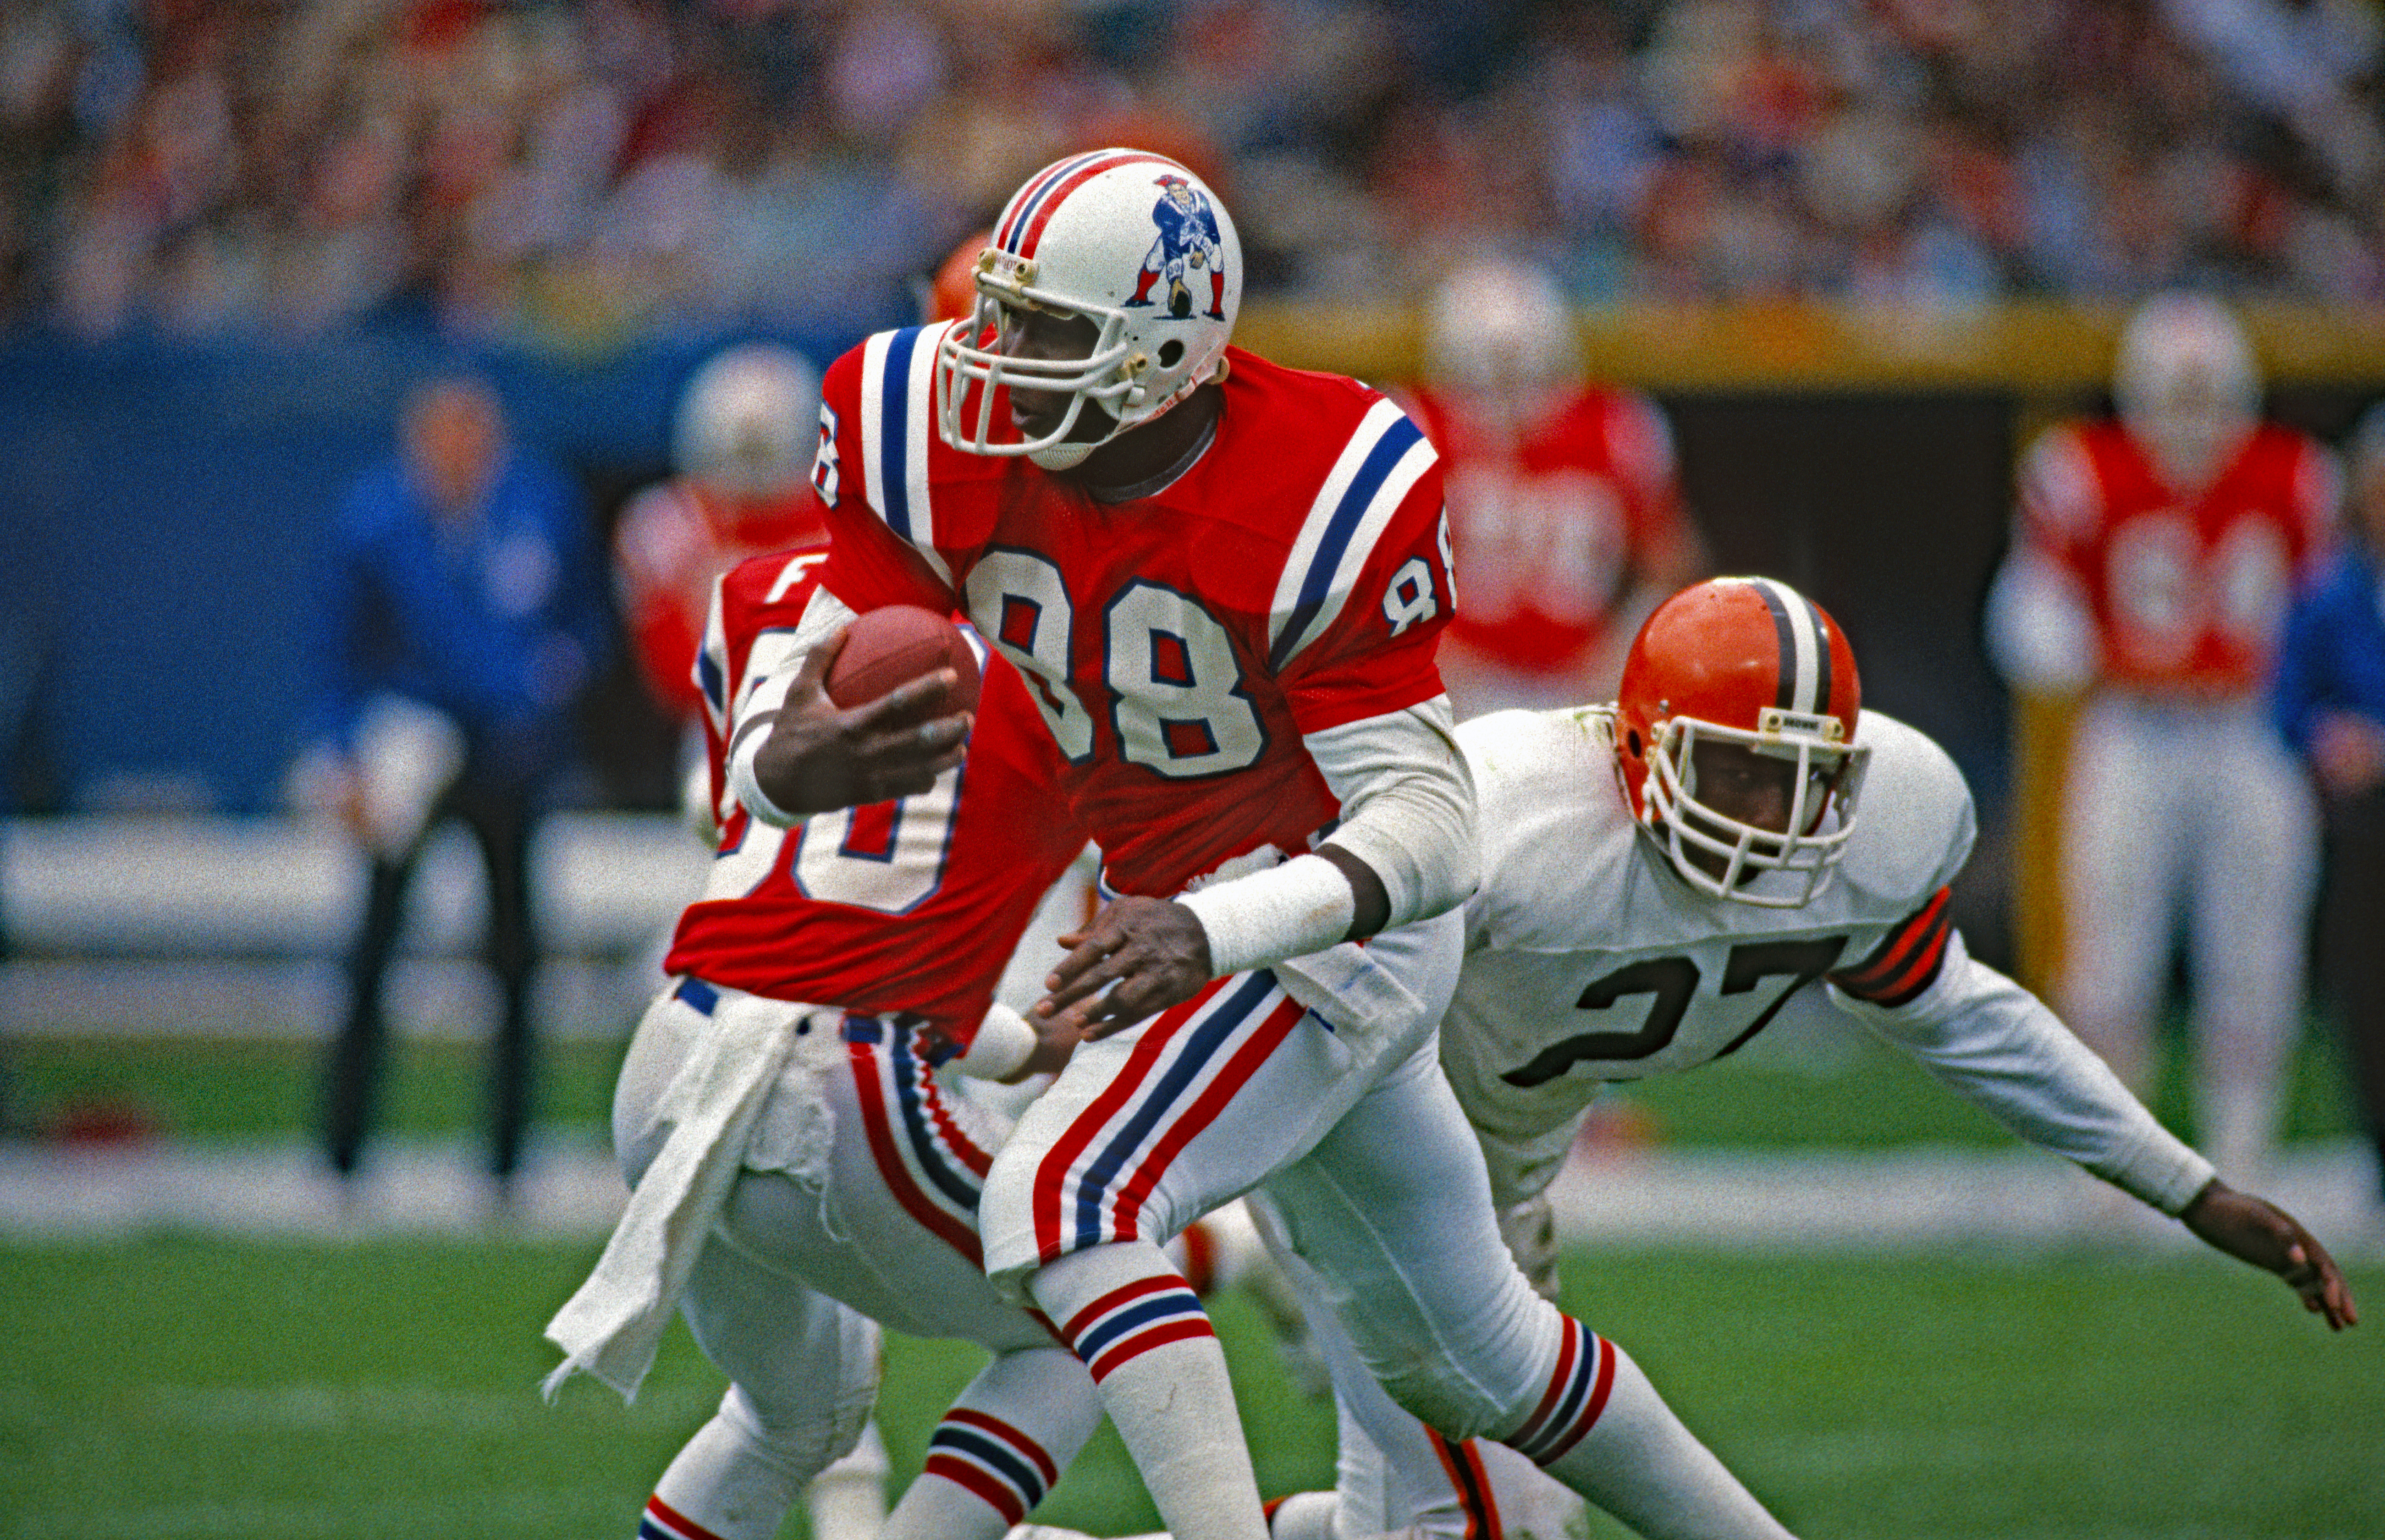 The 20 Best Uniforms in NFL History Made Football Fashionable